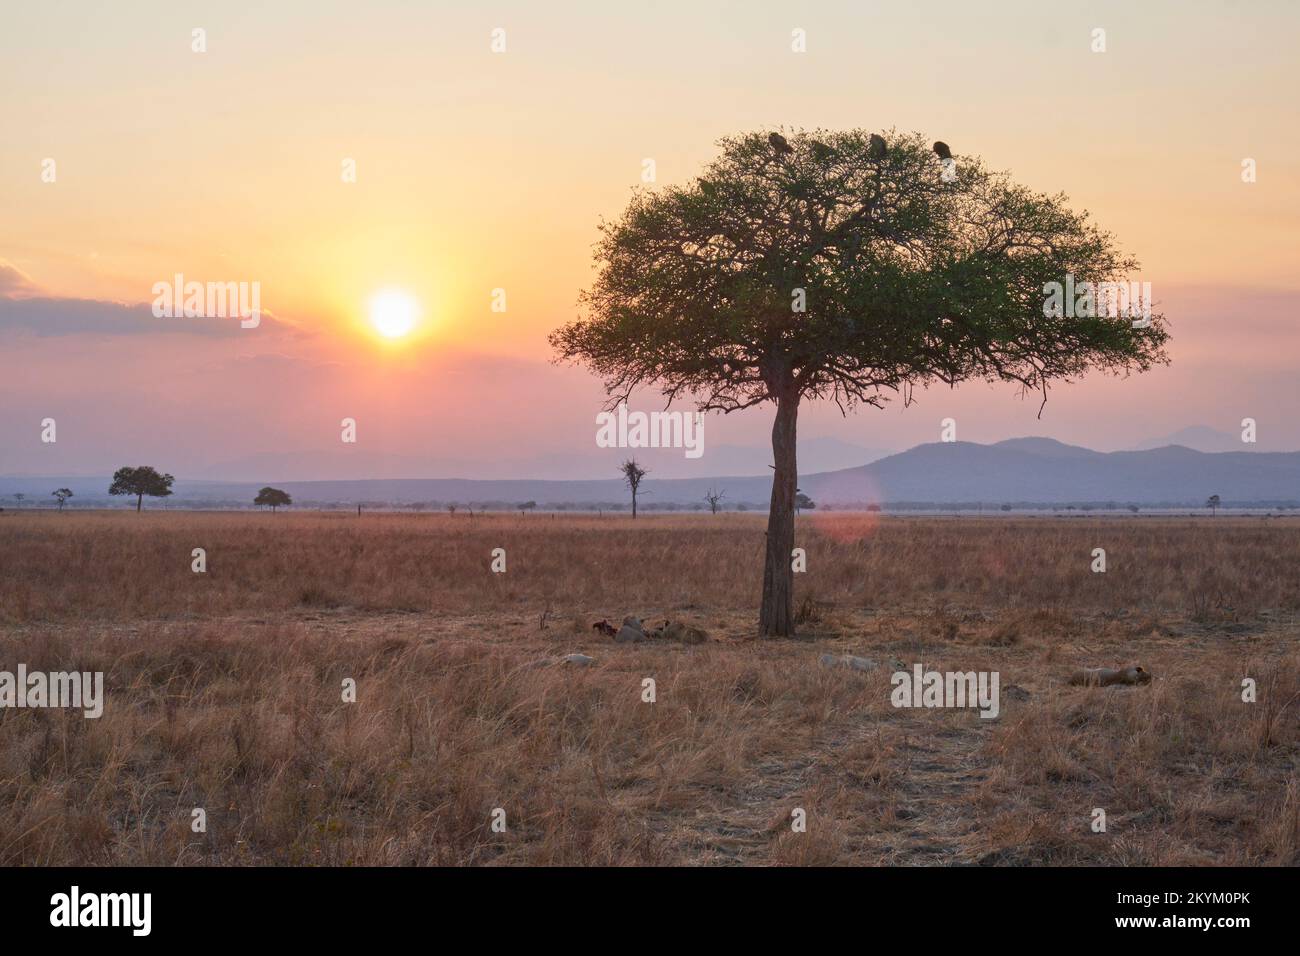 The sun sets as Lions sleep in the grass after eating a Wildebeeste kill  in the evening light of Mikumi national park and vouchers watch from a tree Stock Photo